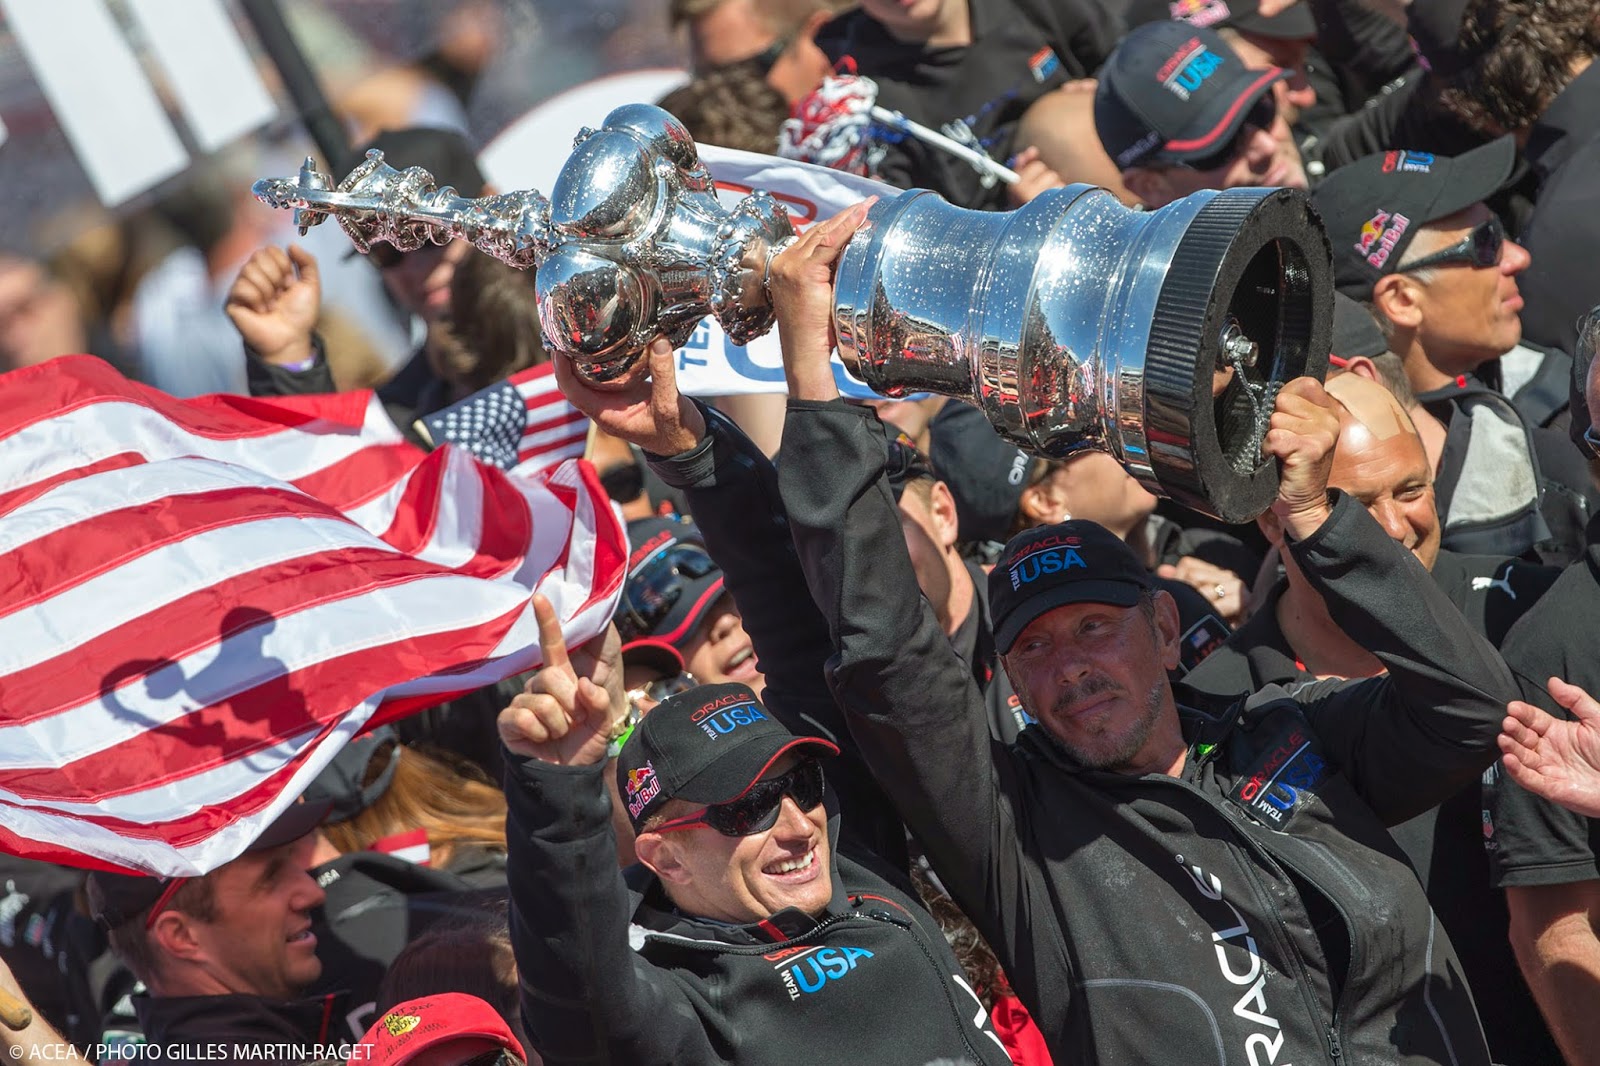 Protocol released for the 35th America’s Cup